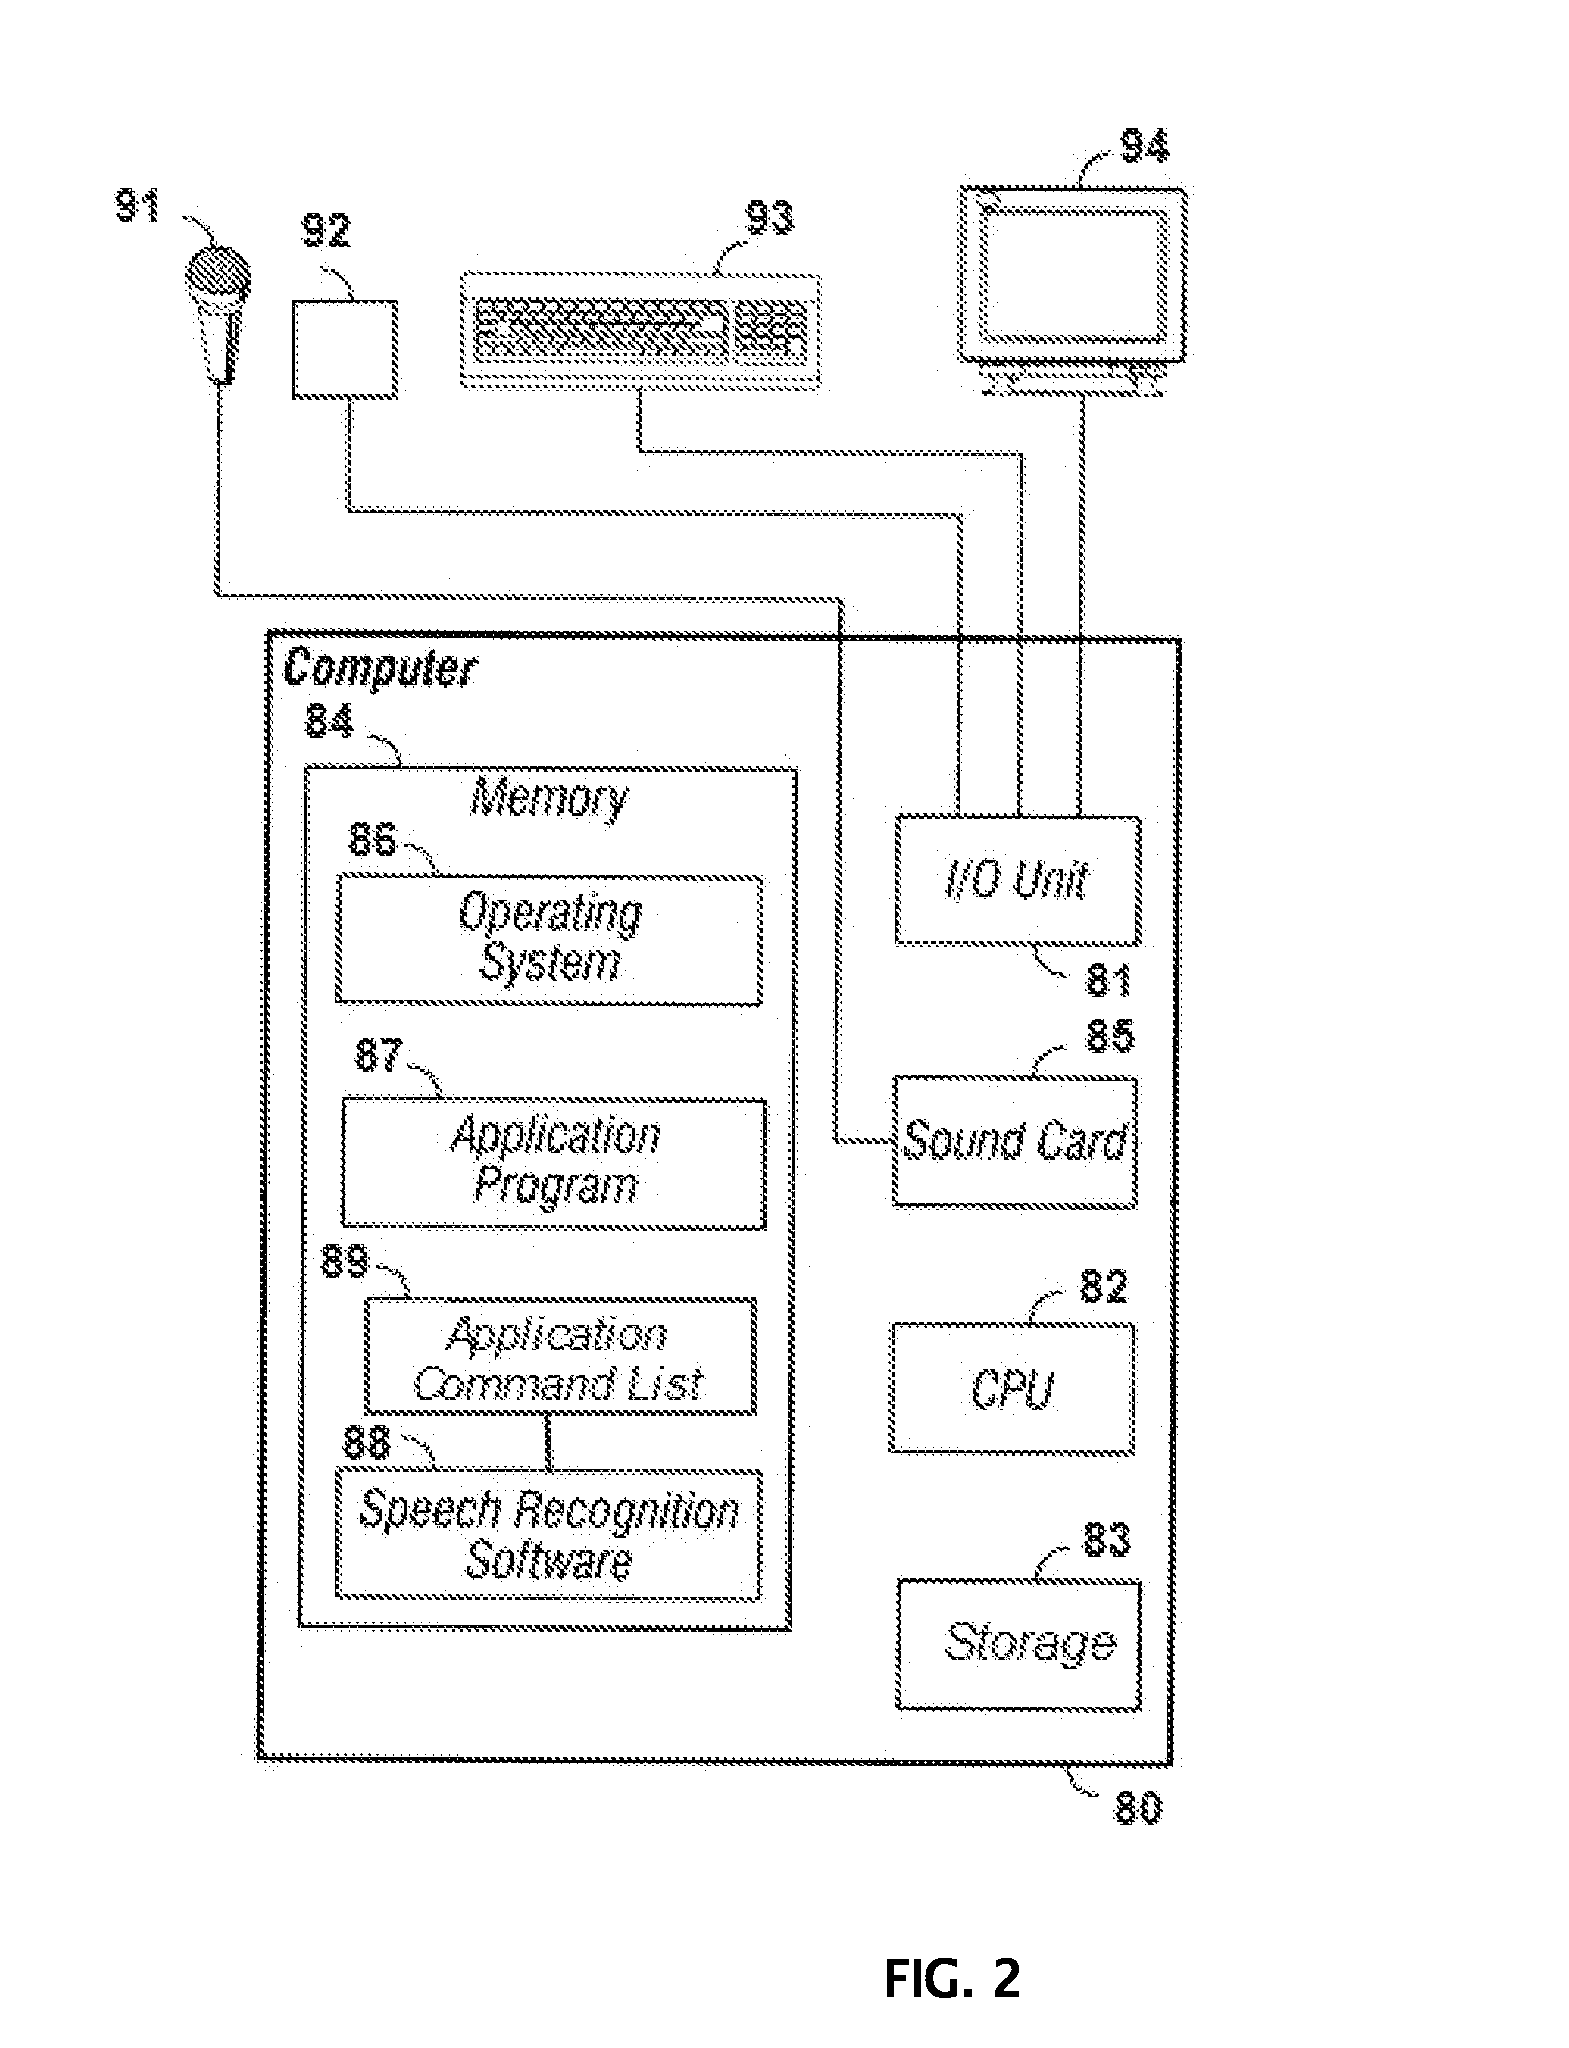 Mouse-free system and method to let users access, navigate, and control a computer device